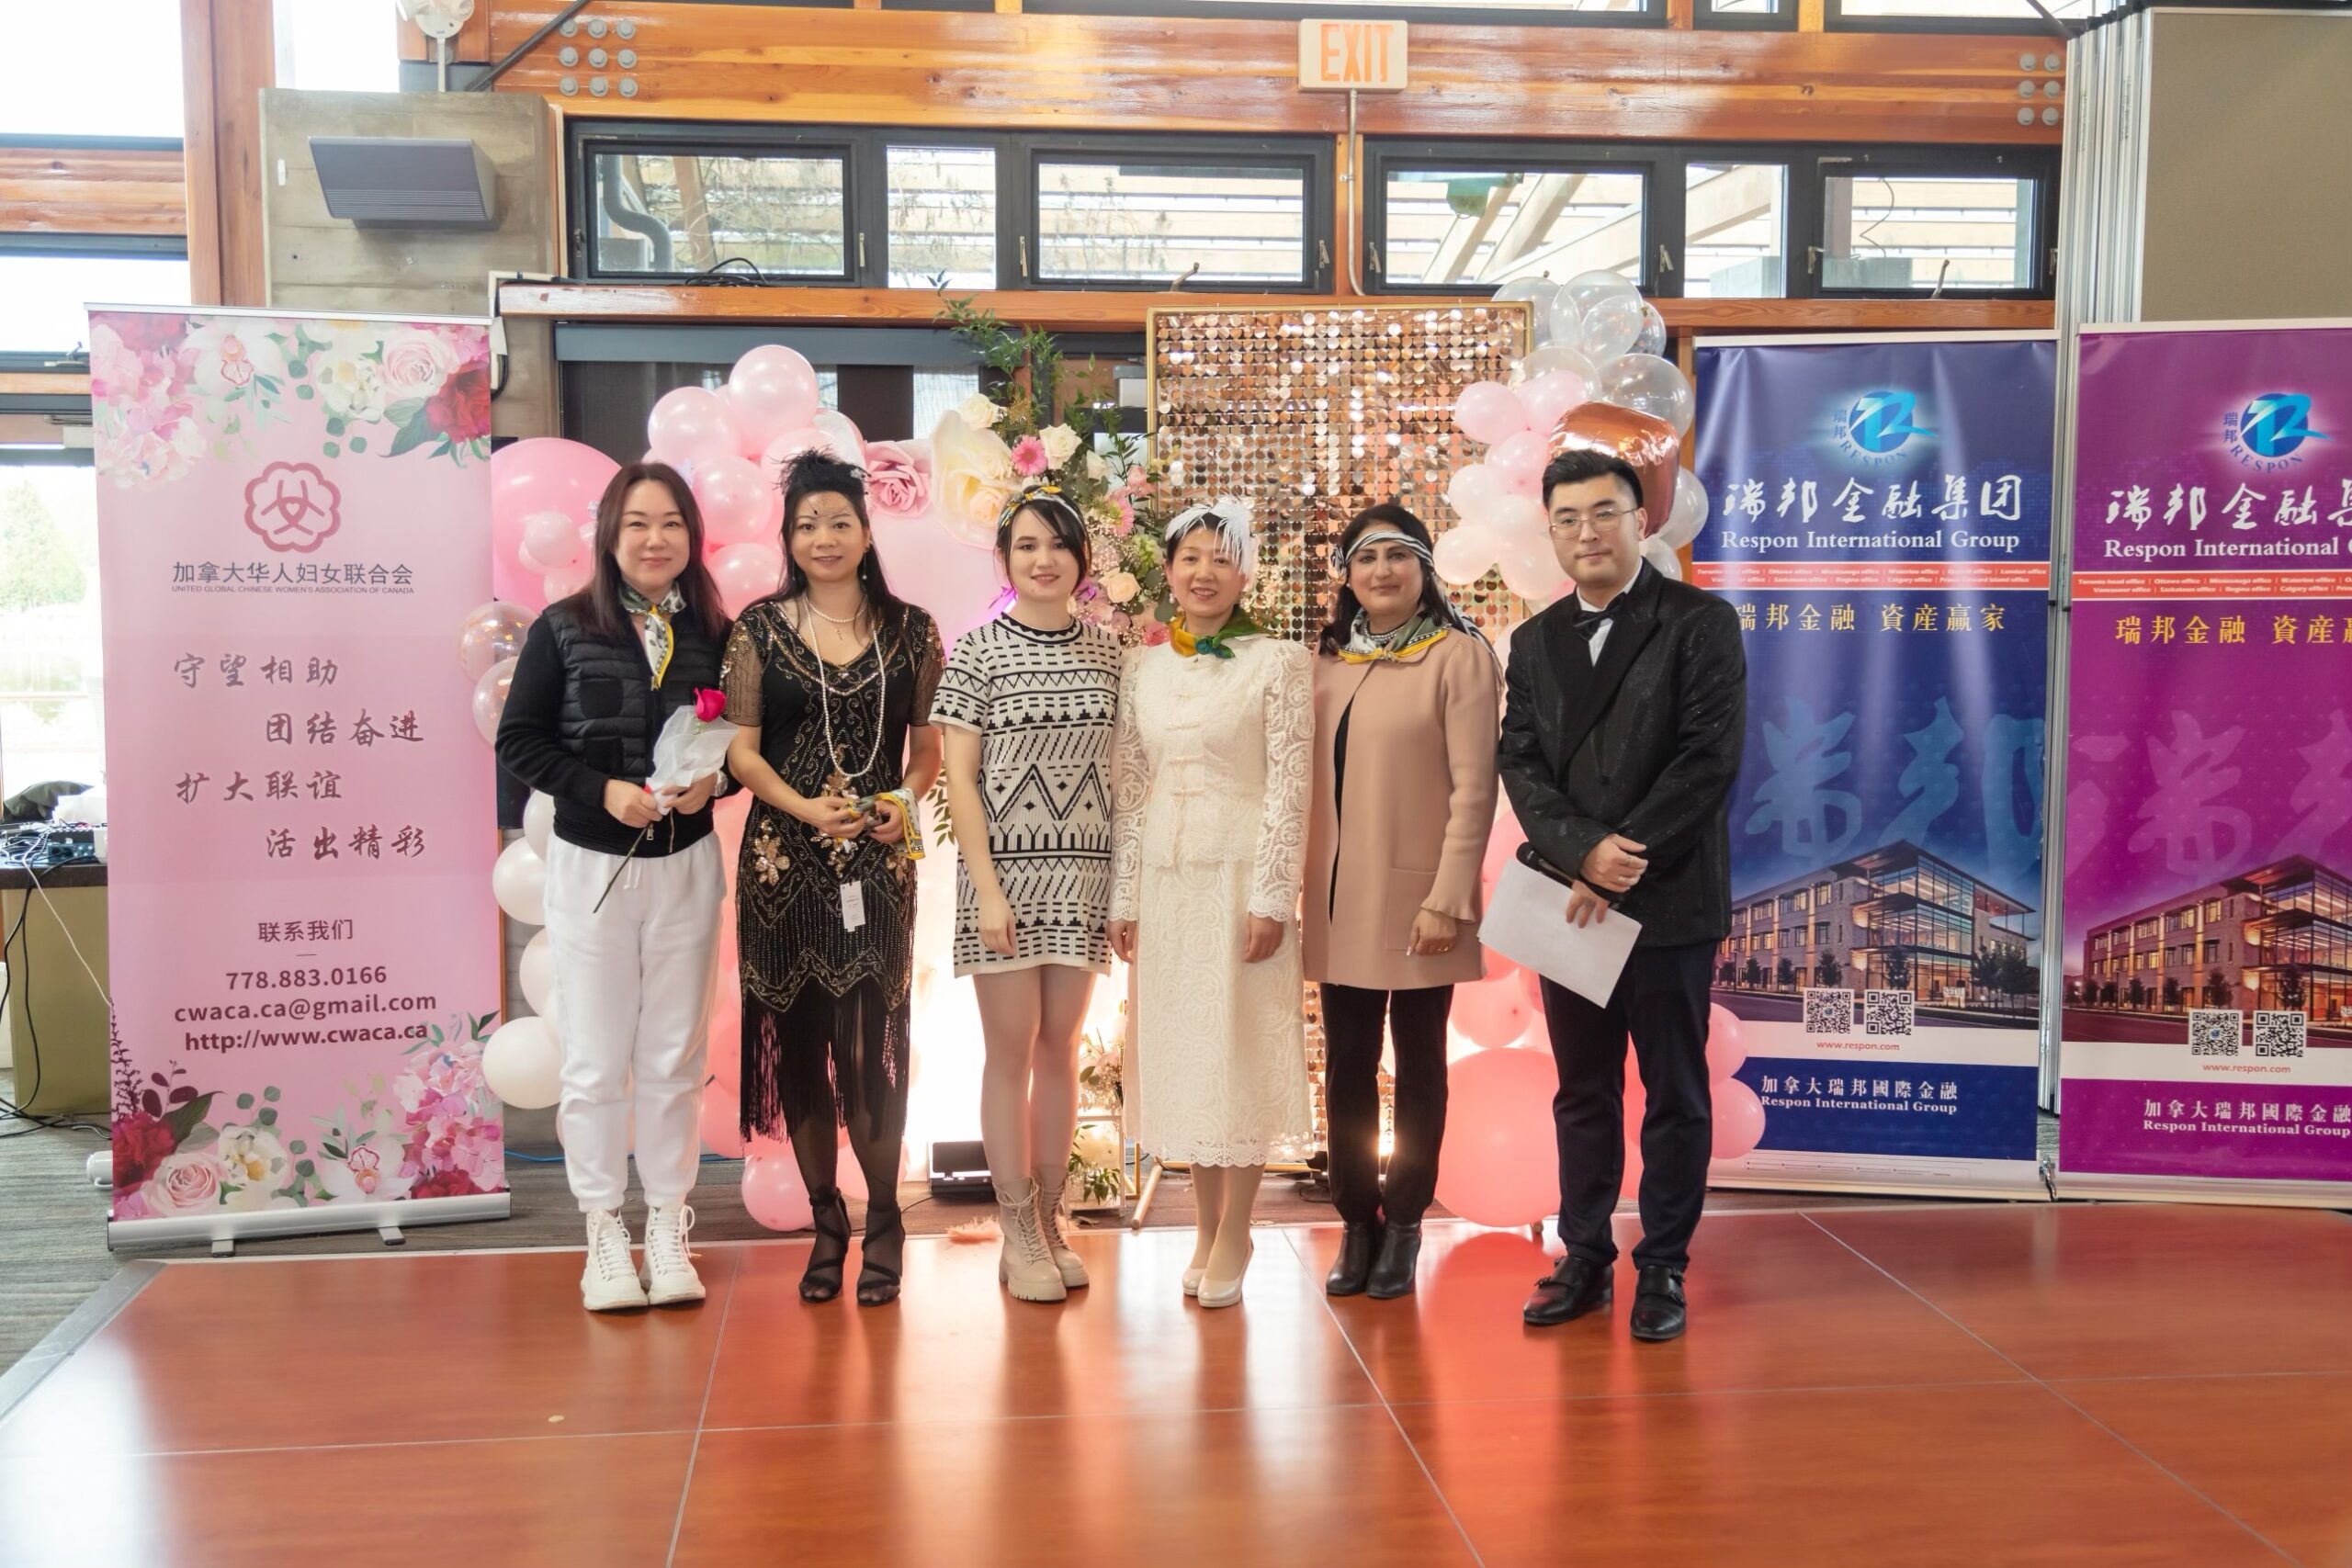 United Global Chinese Women's Association of Canada Fundraising Event - International Women's Day